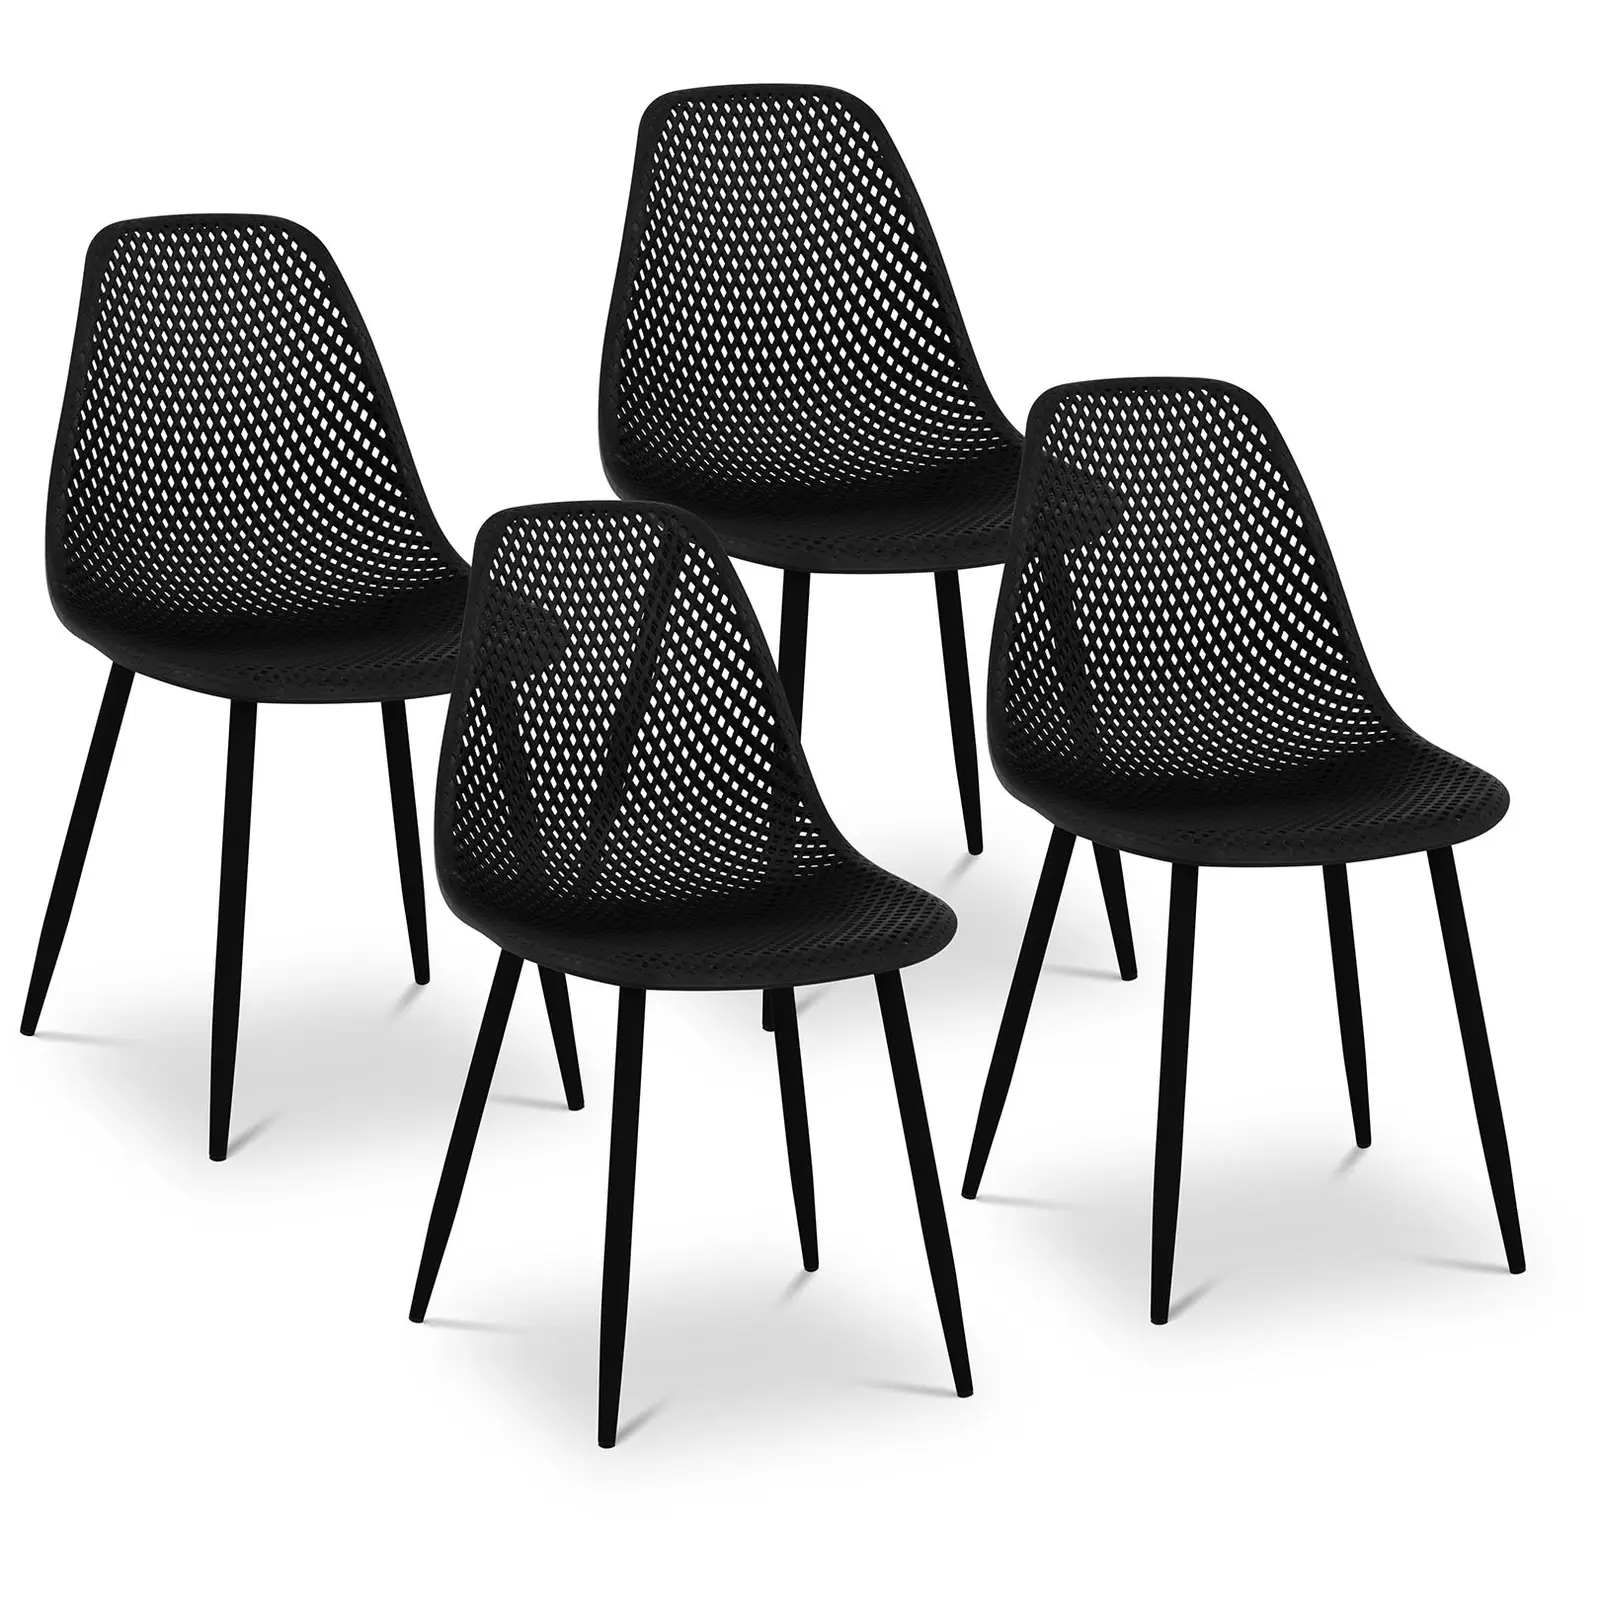 Chair - set of 4 - up to 150 kg - seat 52 x 46.5 cm - black